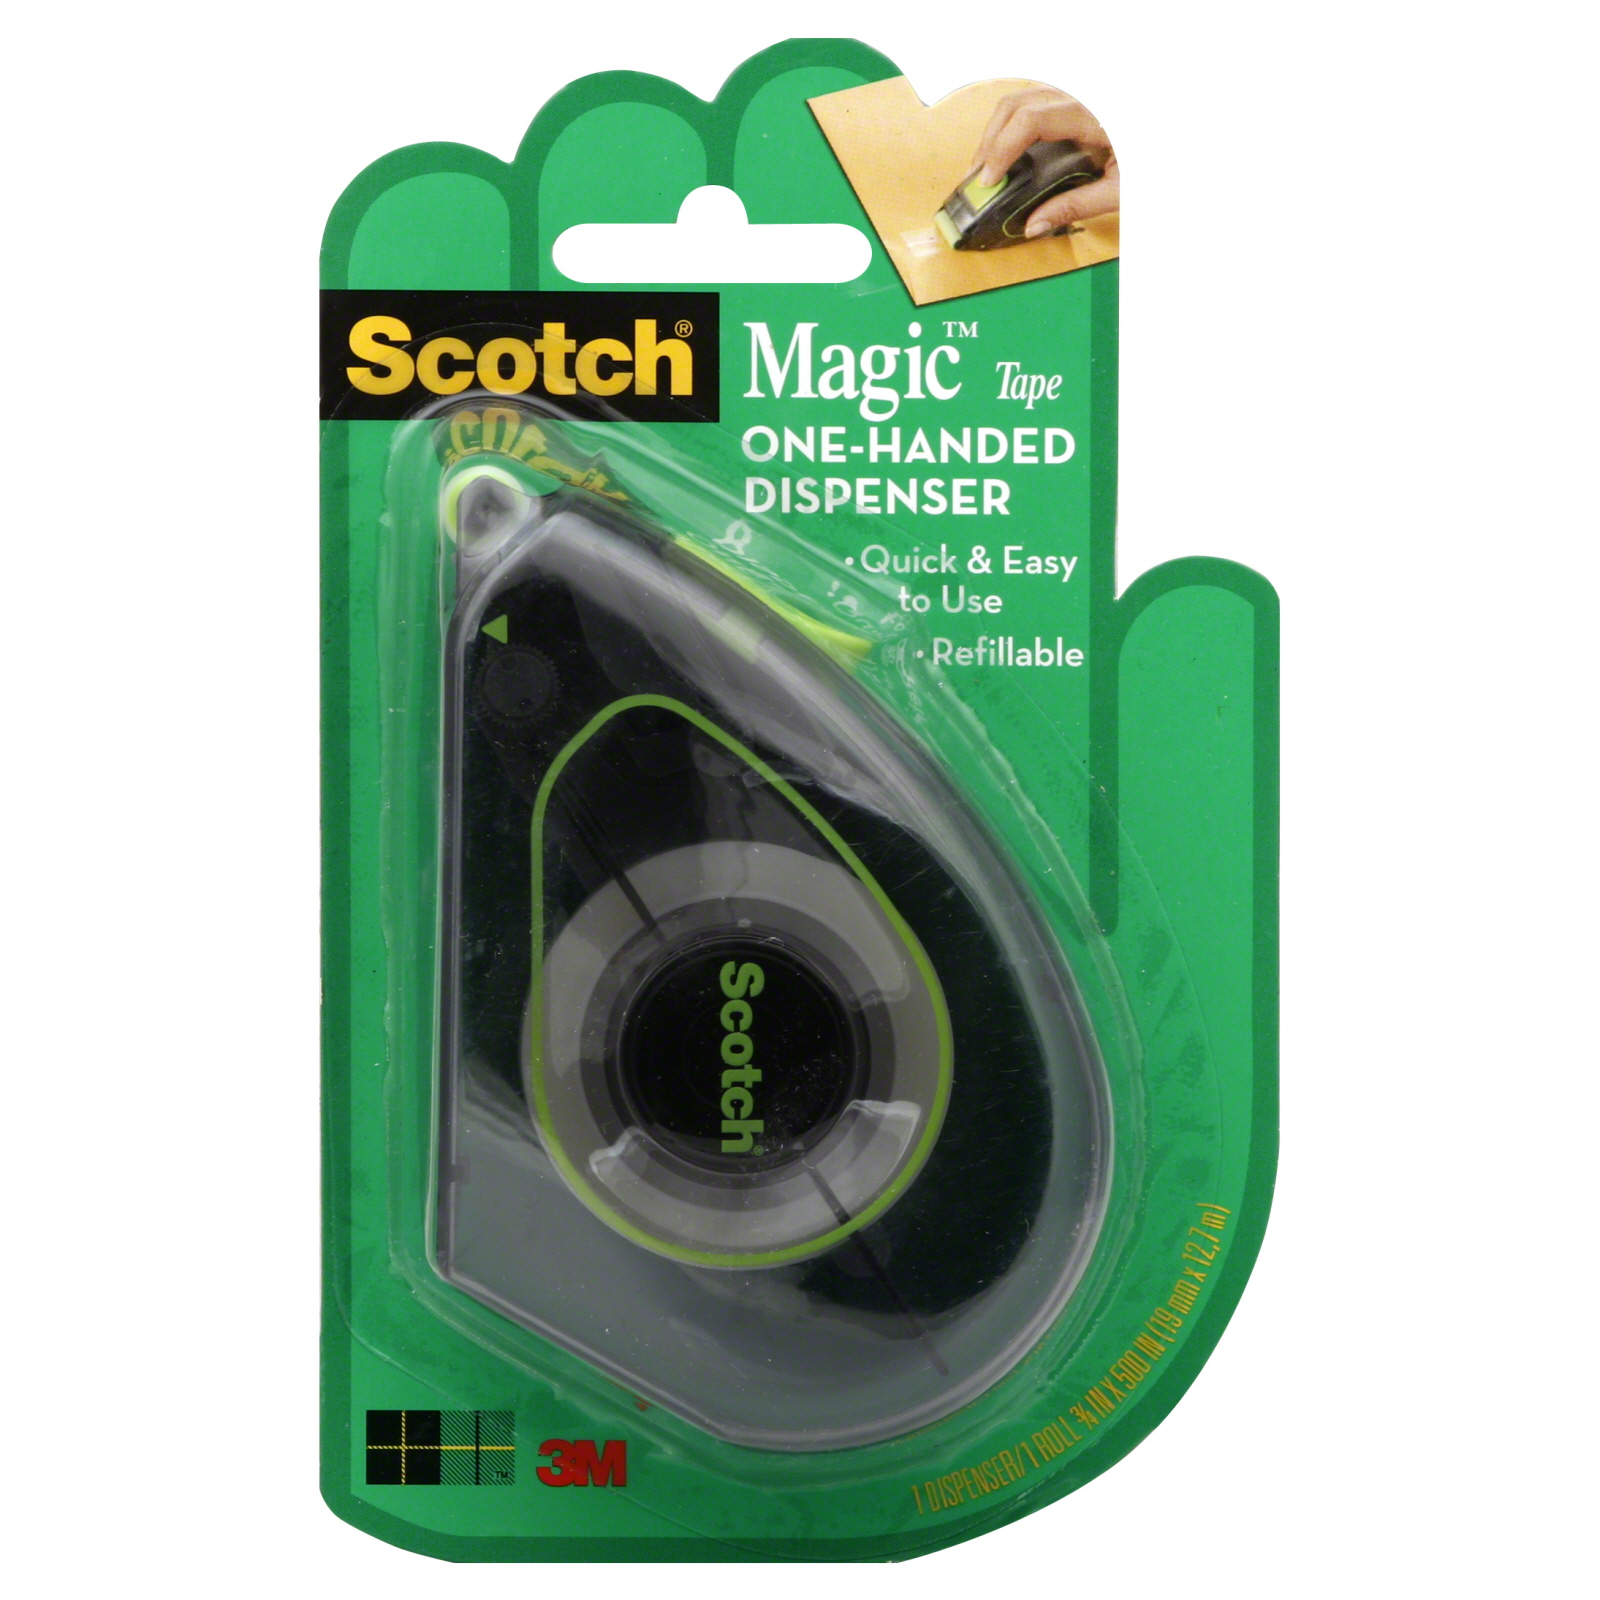 3M 126 Scotch Magic Tape One Handed Dispenser With Tape Roll